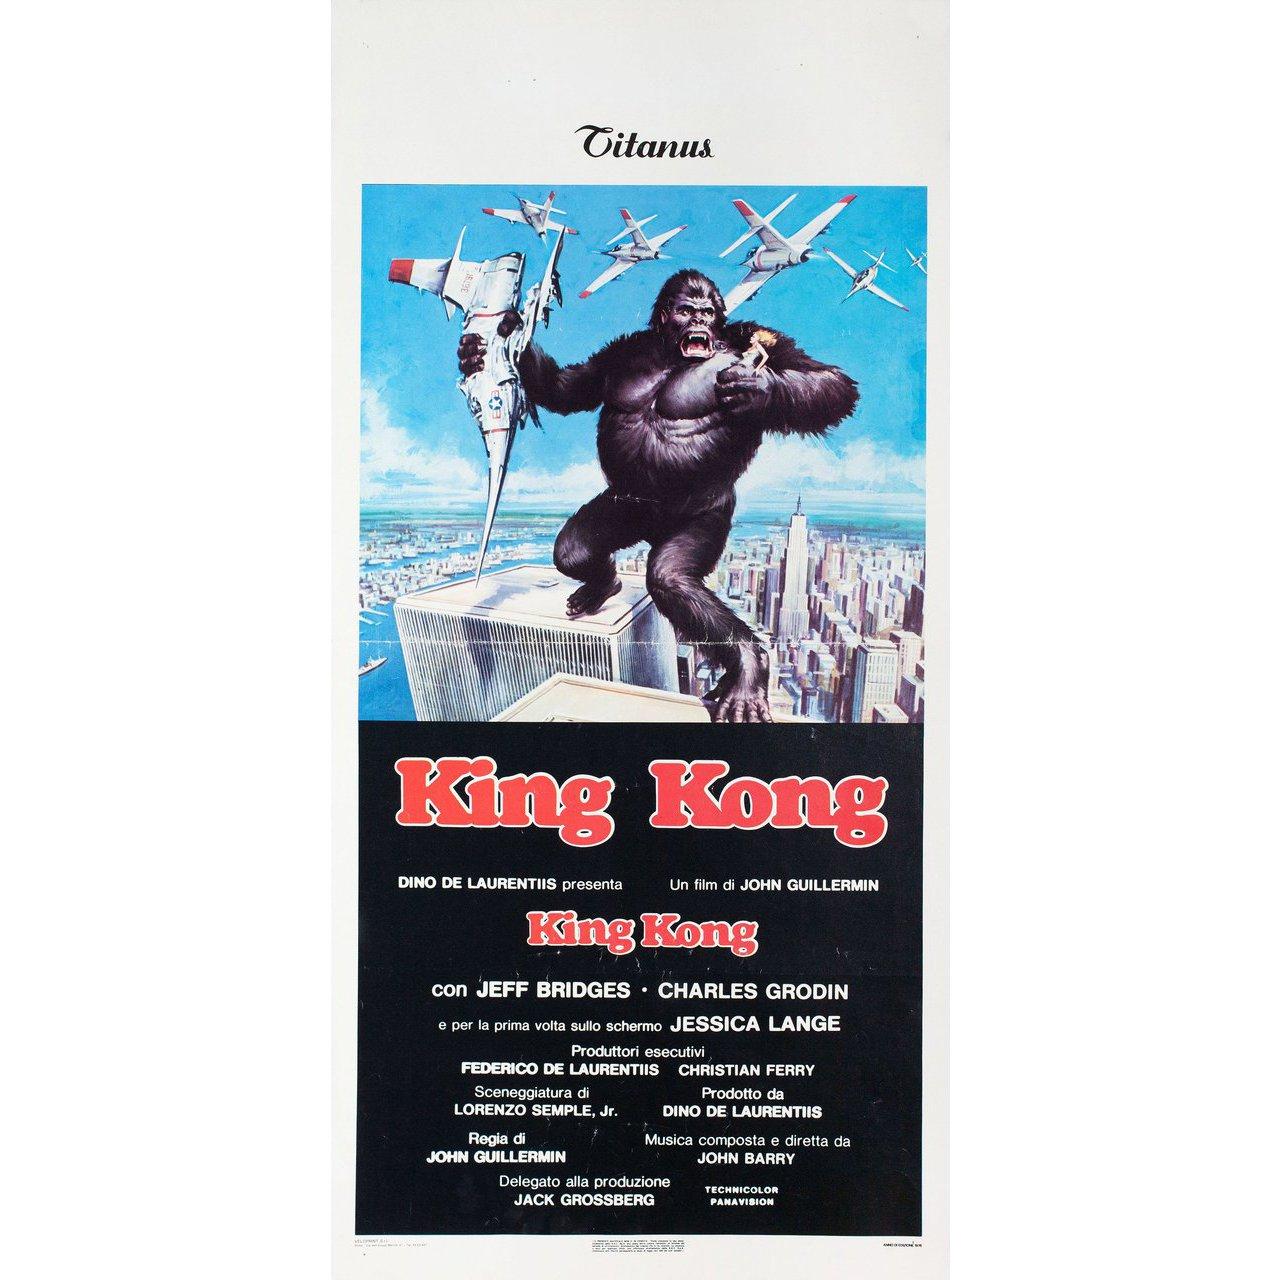 Original 1976 Italian locandina poster for the film King Kong directed by John Guillermin with Jeff Bridges / Charles Grodin / Jessica Lange / John Randolph. Very Good-Fine condition, folded. Many original posters were issued folded or were